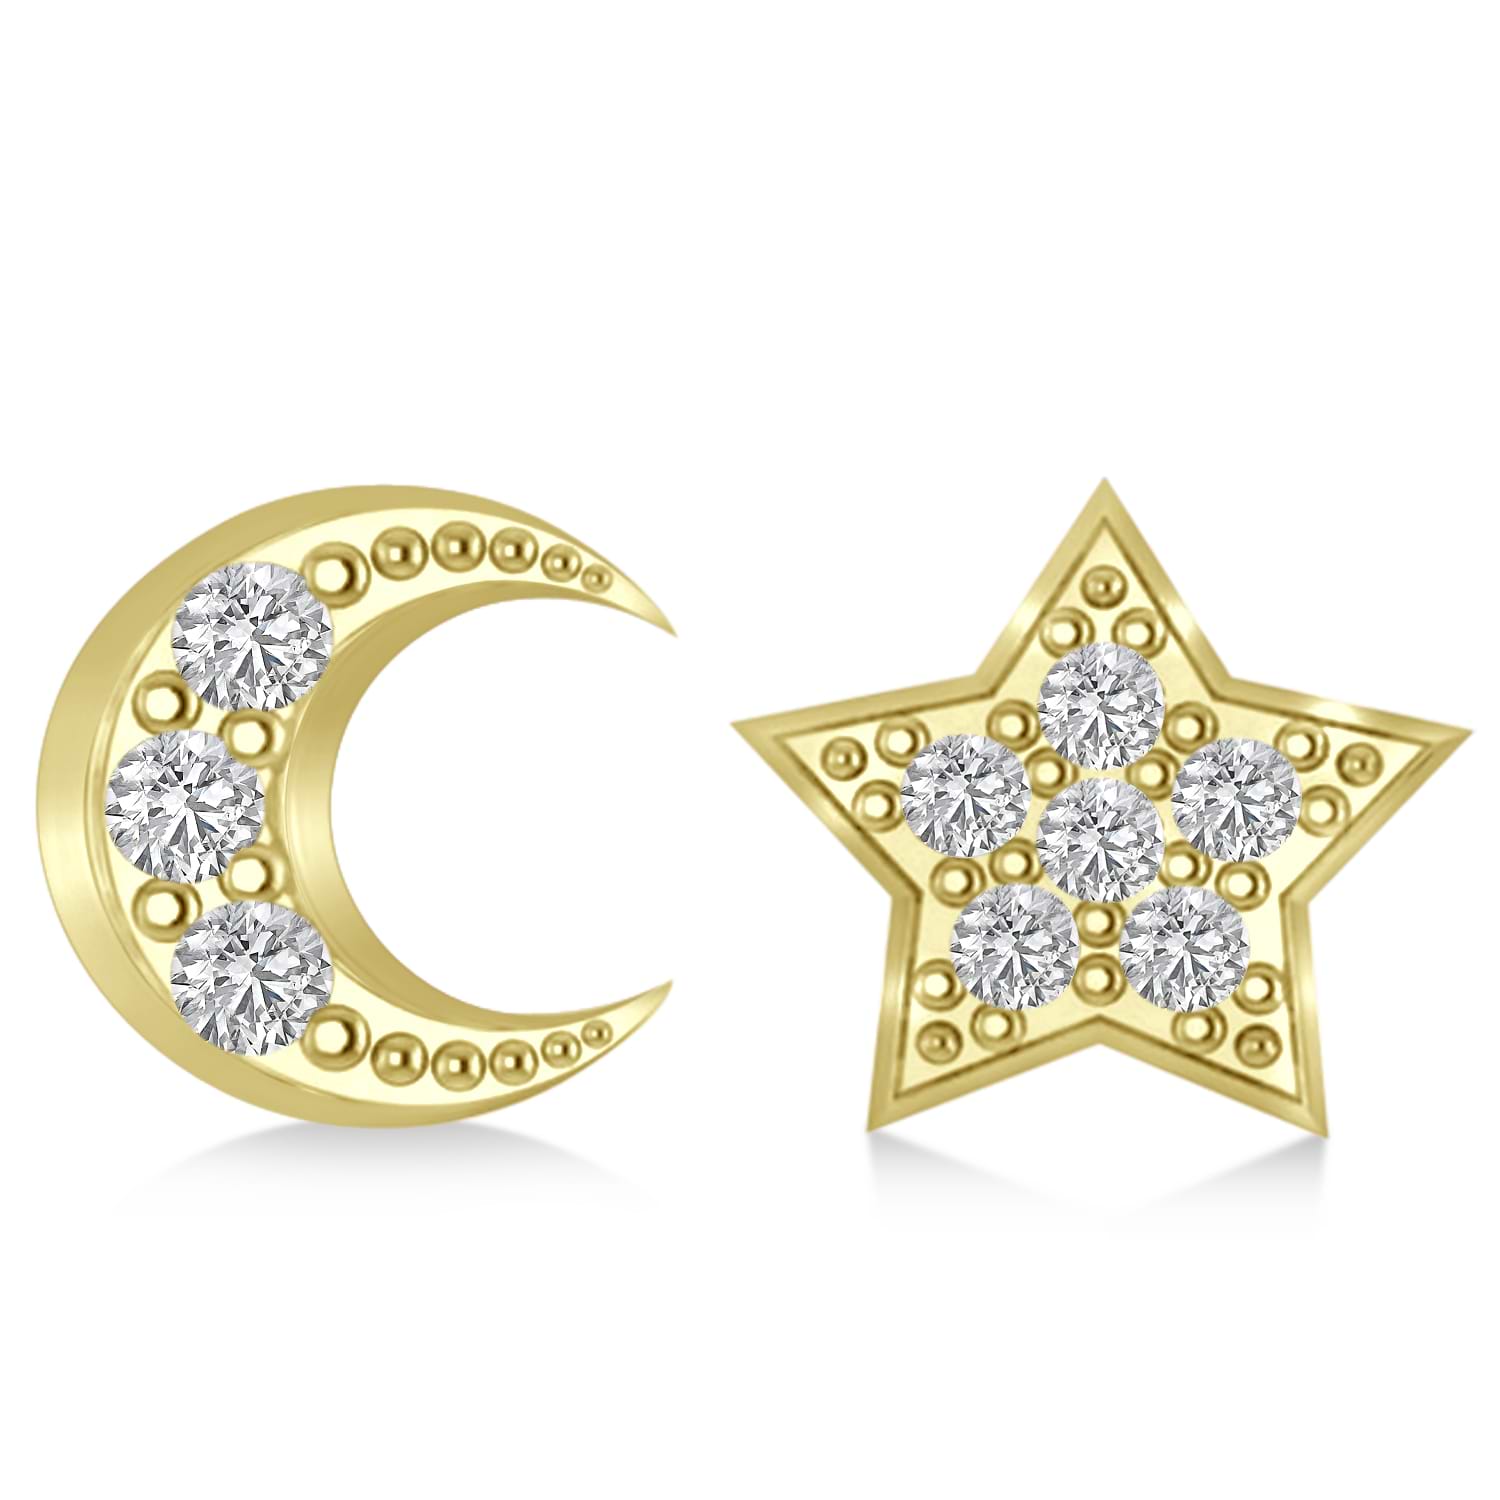 Moon & Star Diamond Mismatched Earrings 14k Yellow Gold (0.14ct)